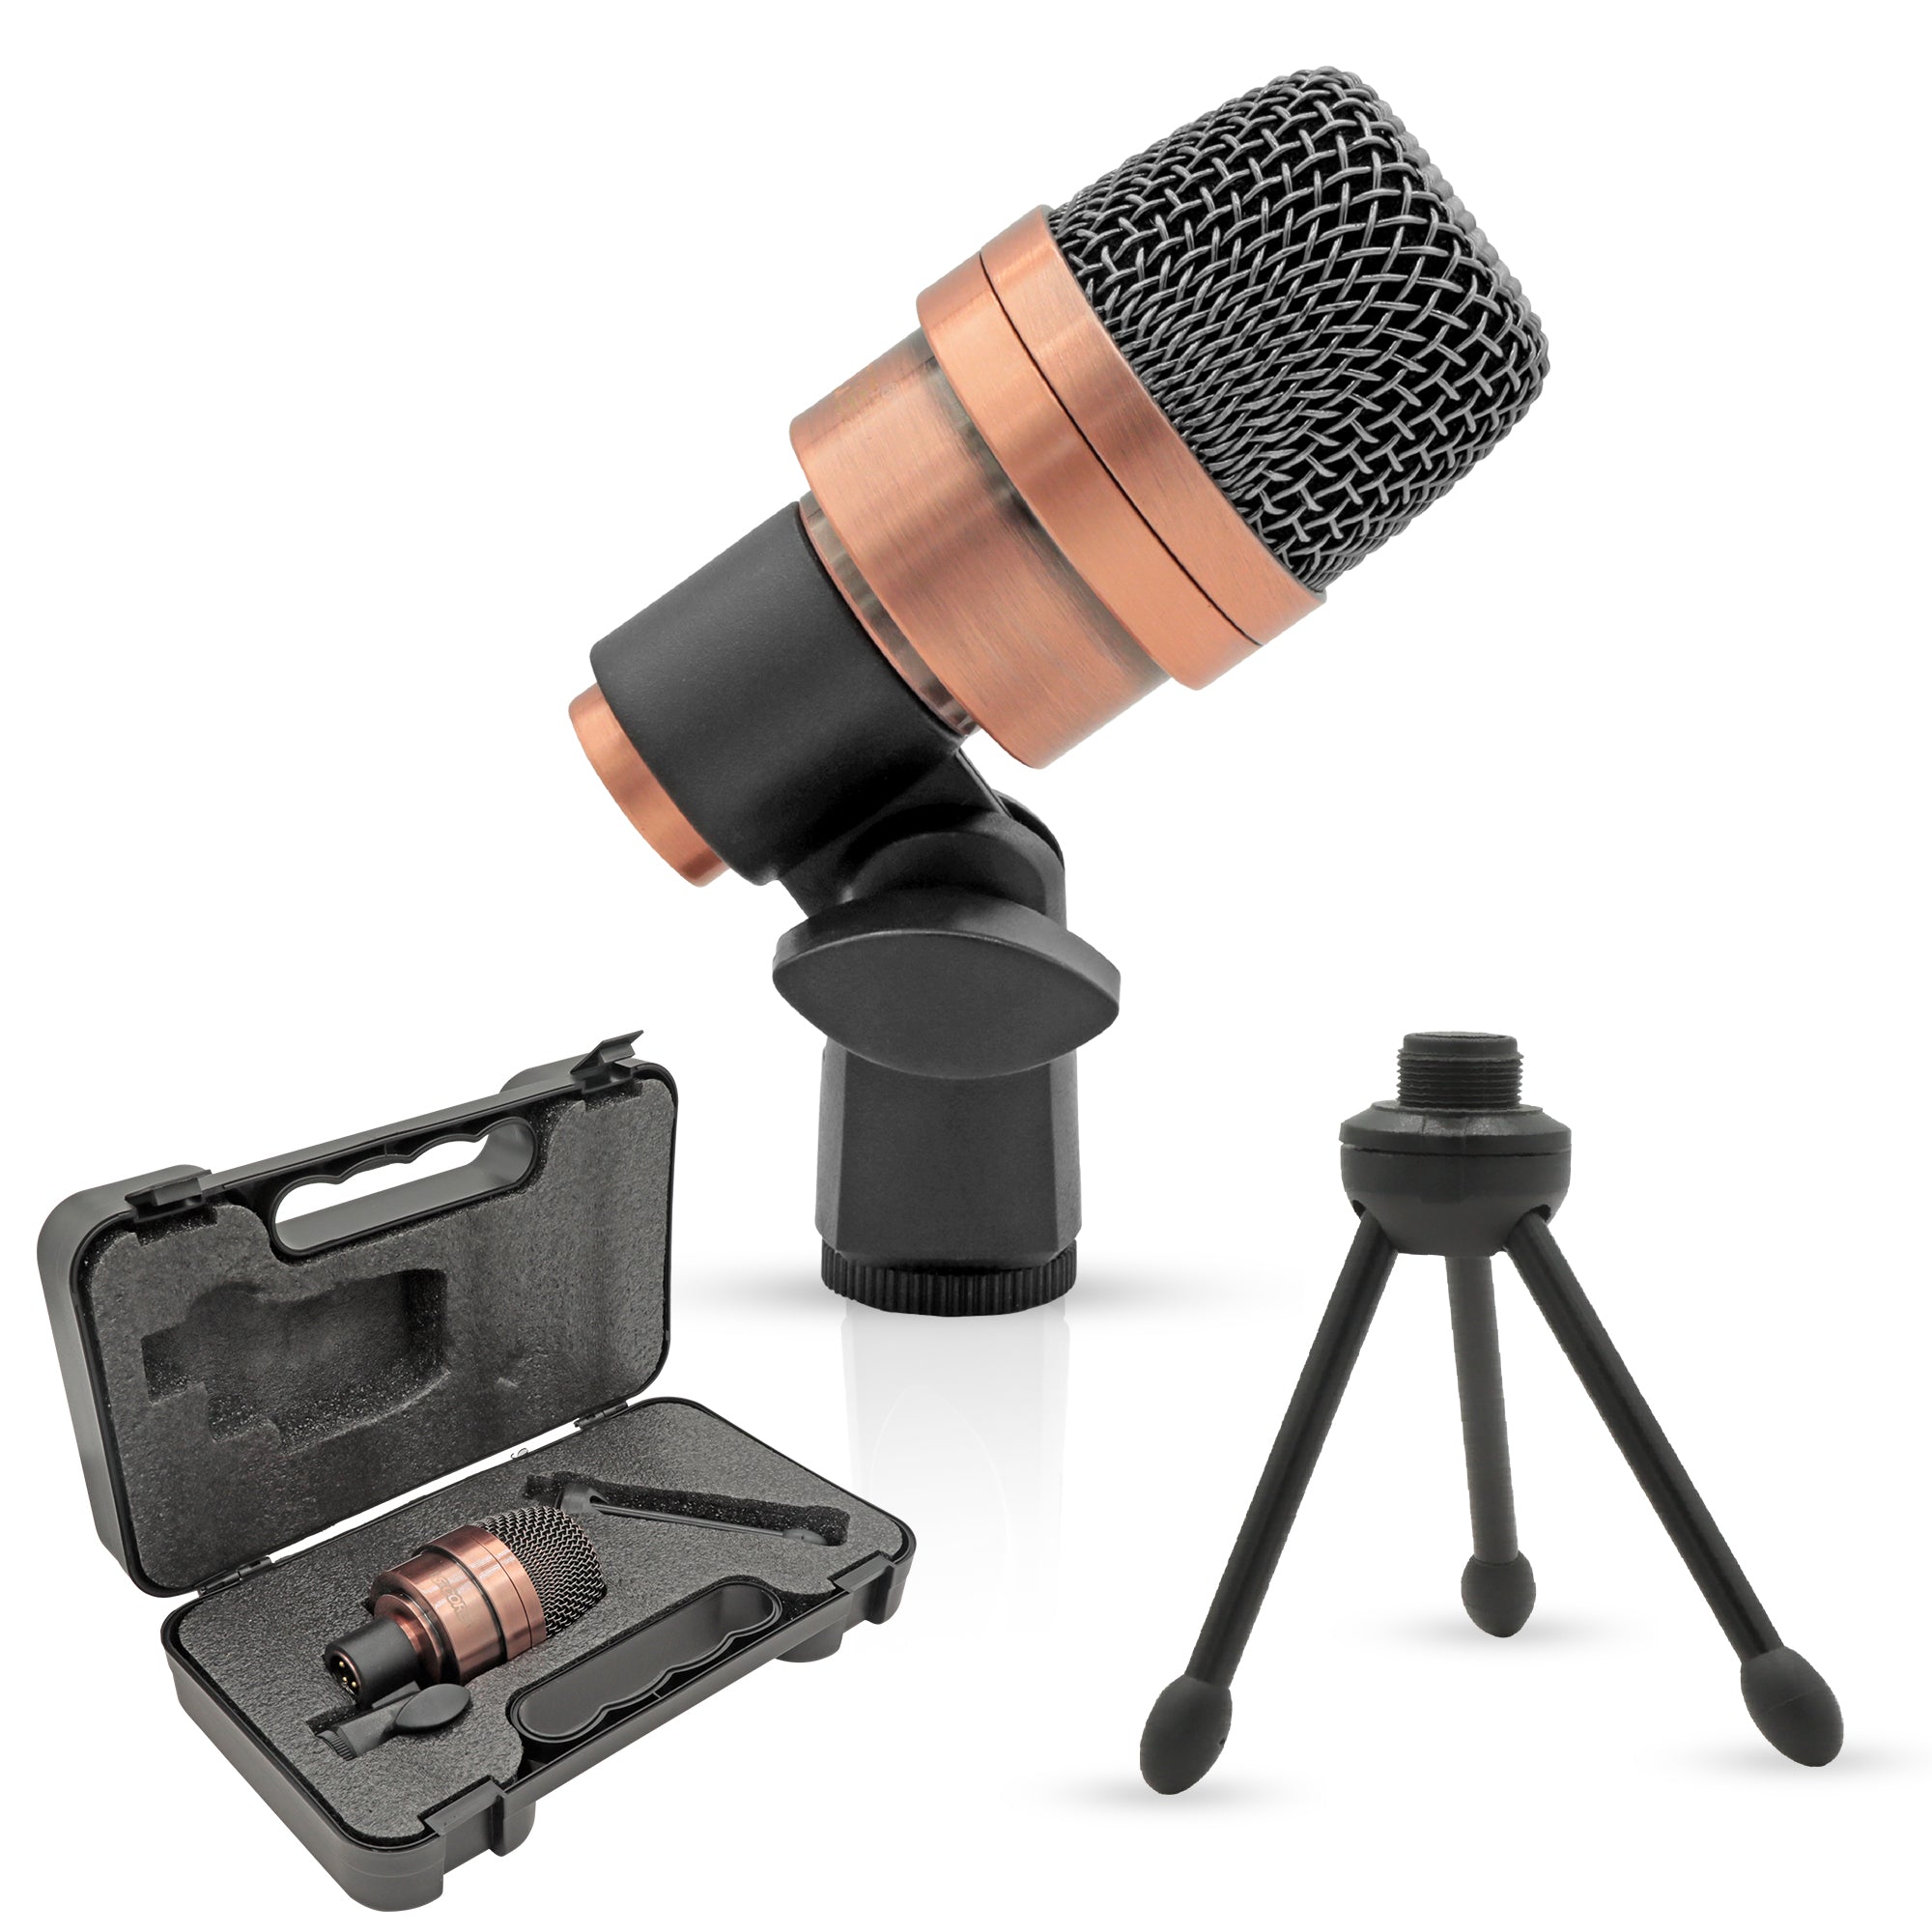 5 Core Tom Microphone • XLR Wired Uni Directional Snare Drum and Other Musical Instrument Mic